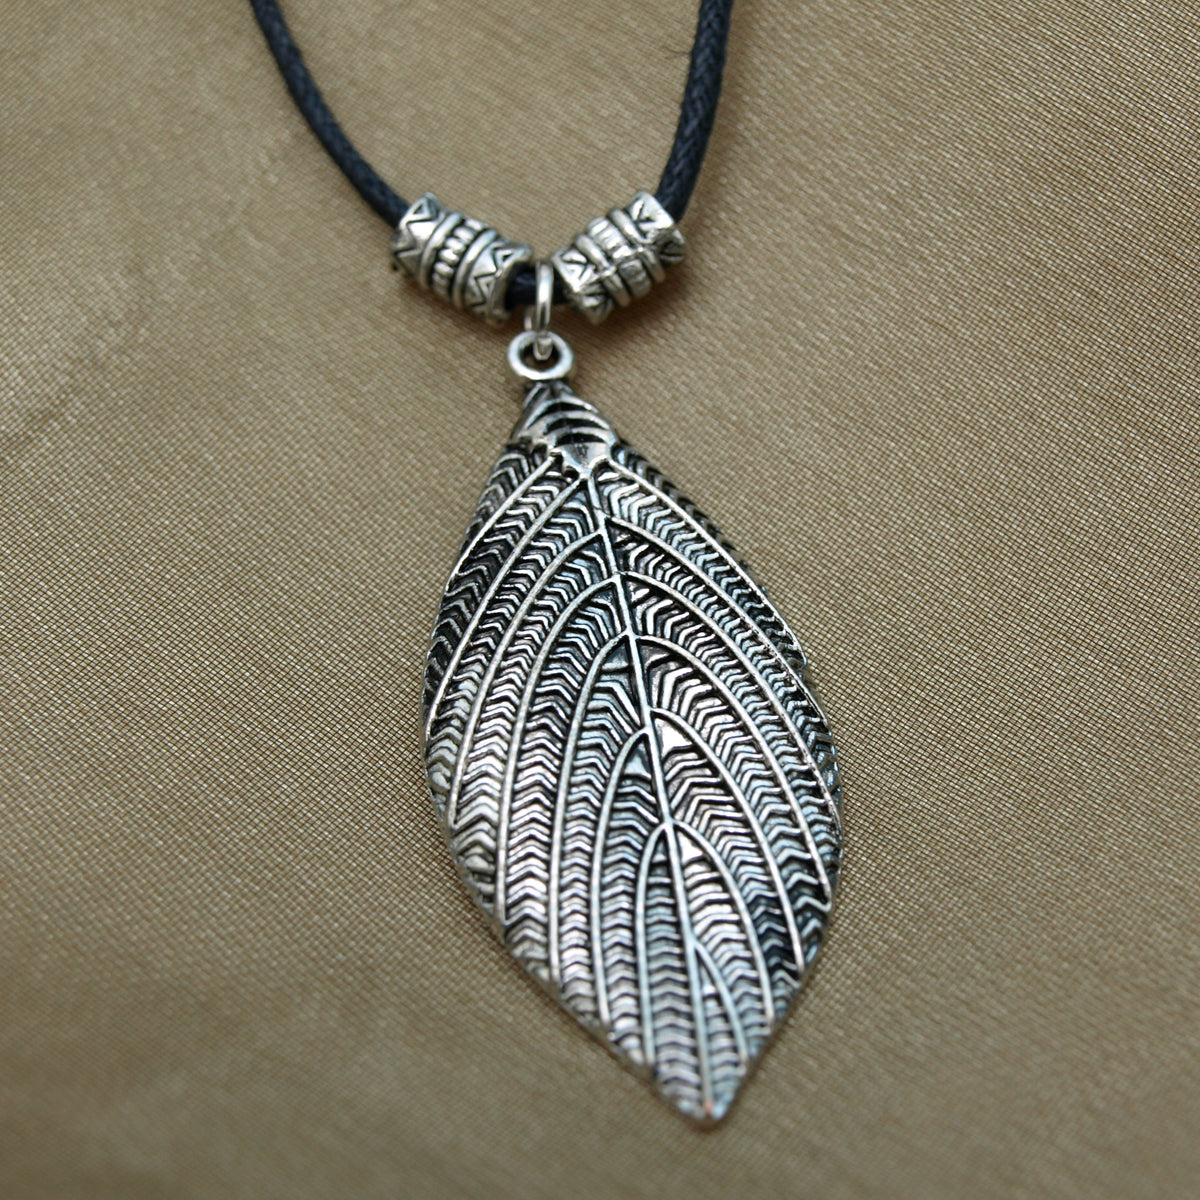 Silver Leaf Shaped Pendant Necklace, 17.7 inches